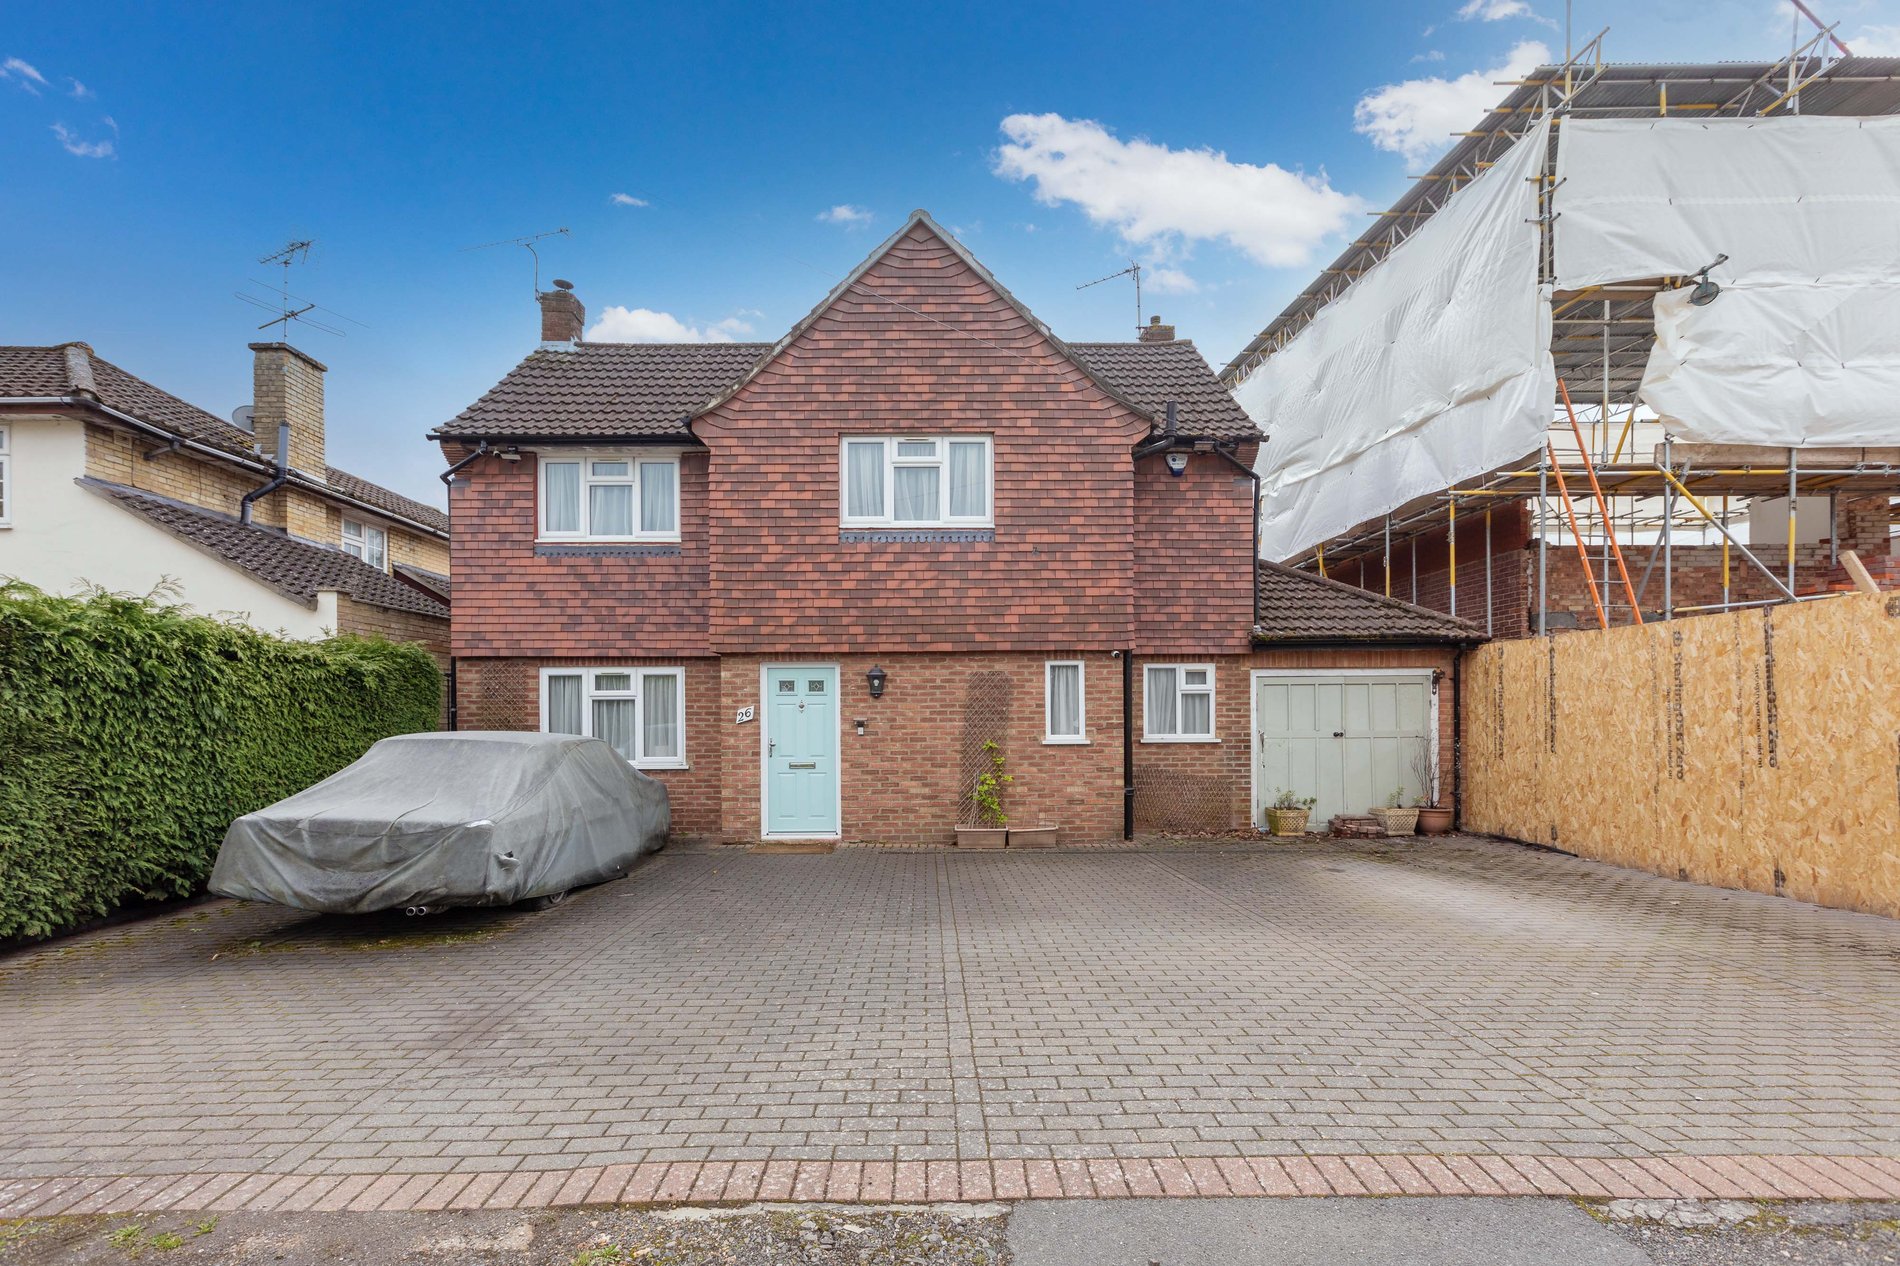 3 bed detached house for sale in Wood Lane Close, Iver - Property Image 1